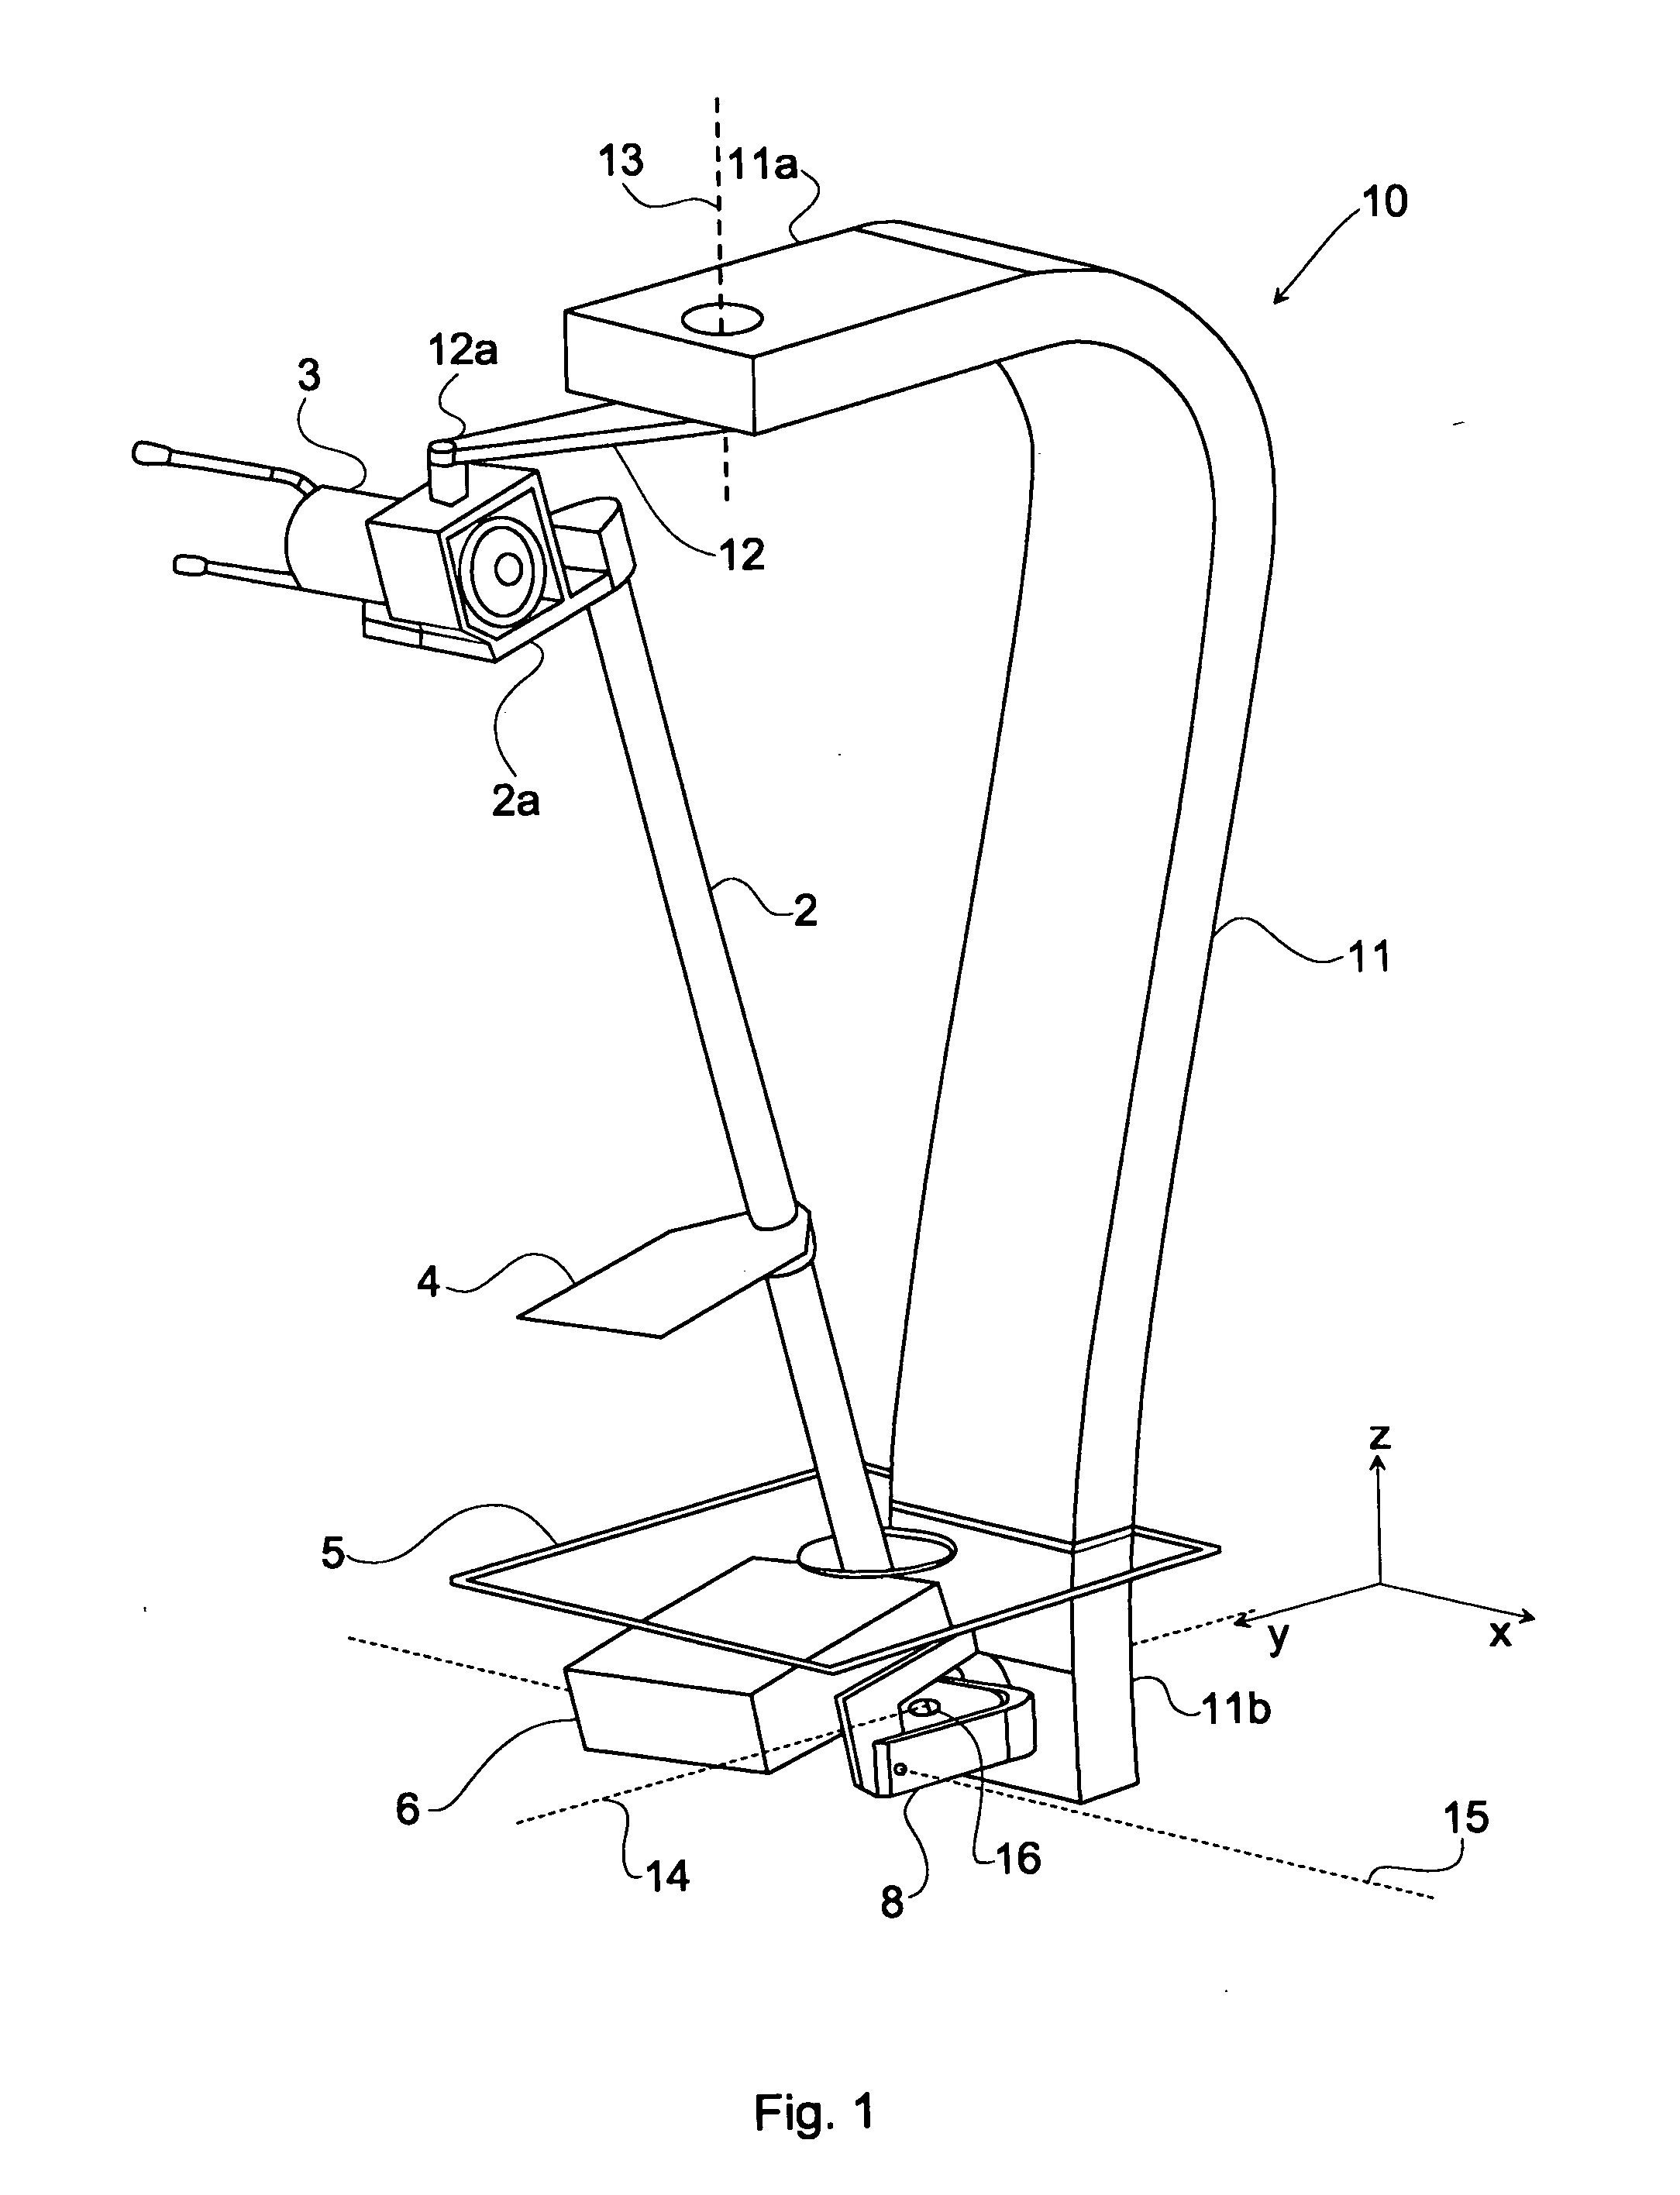 Apparatus and method for recording radiation image data of an object